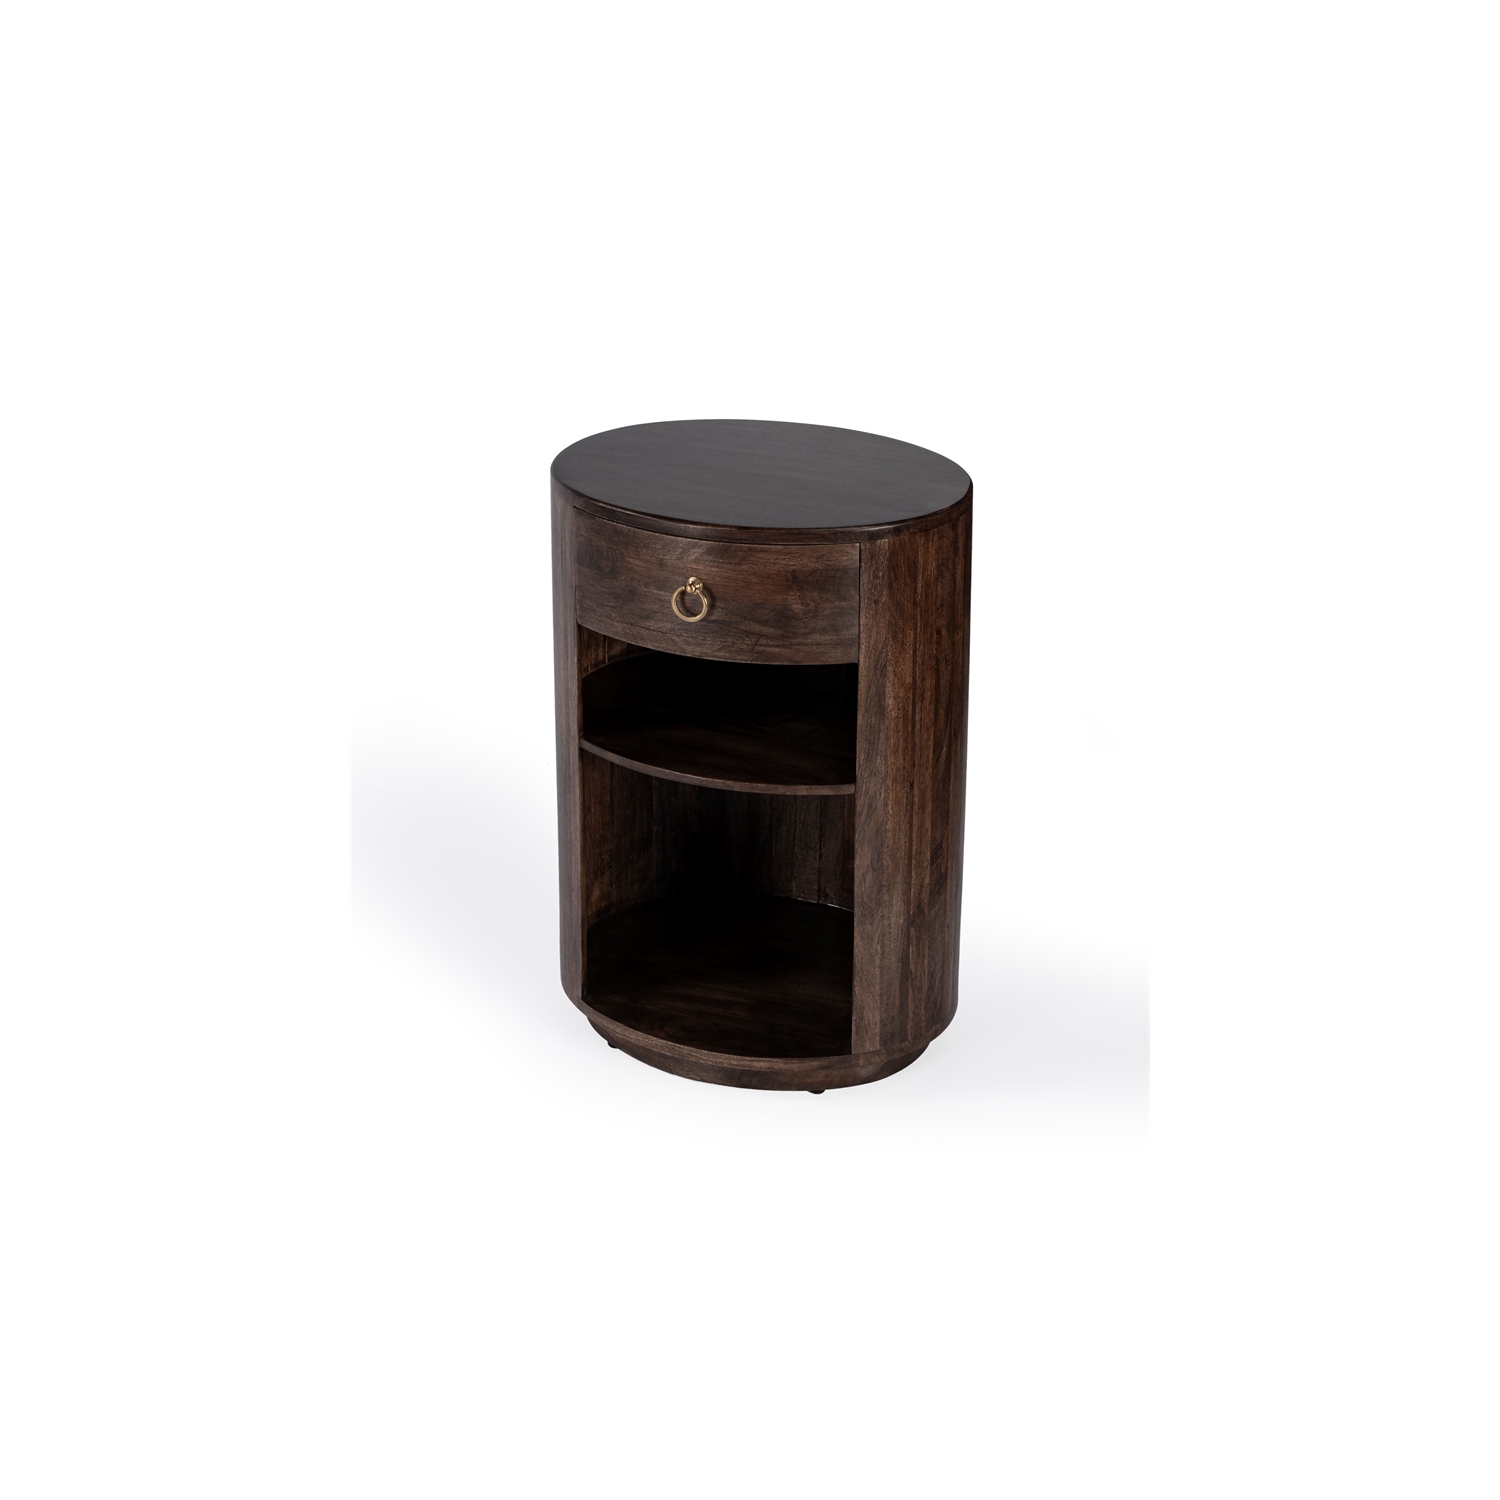 Bowery Hill Transitional Mango Wood End Table in Dark Brown Finish